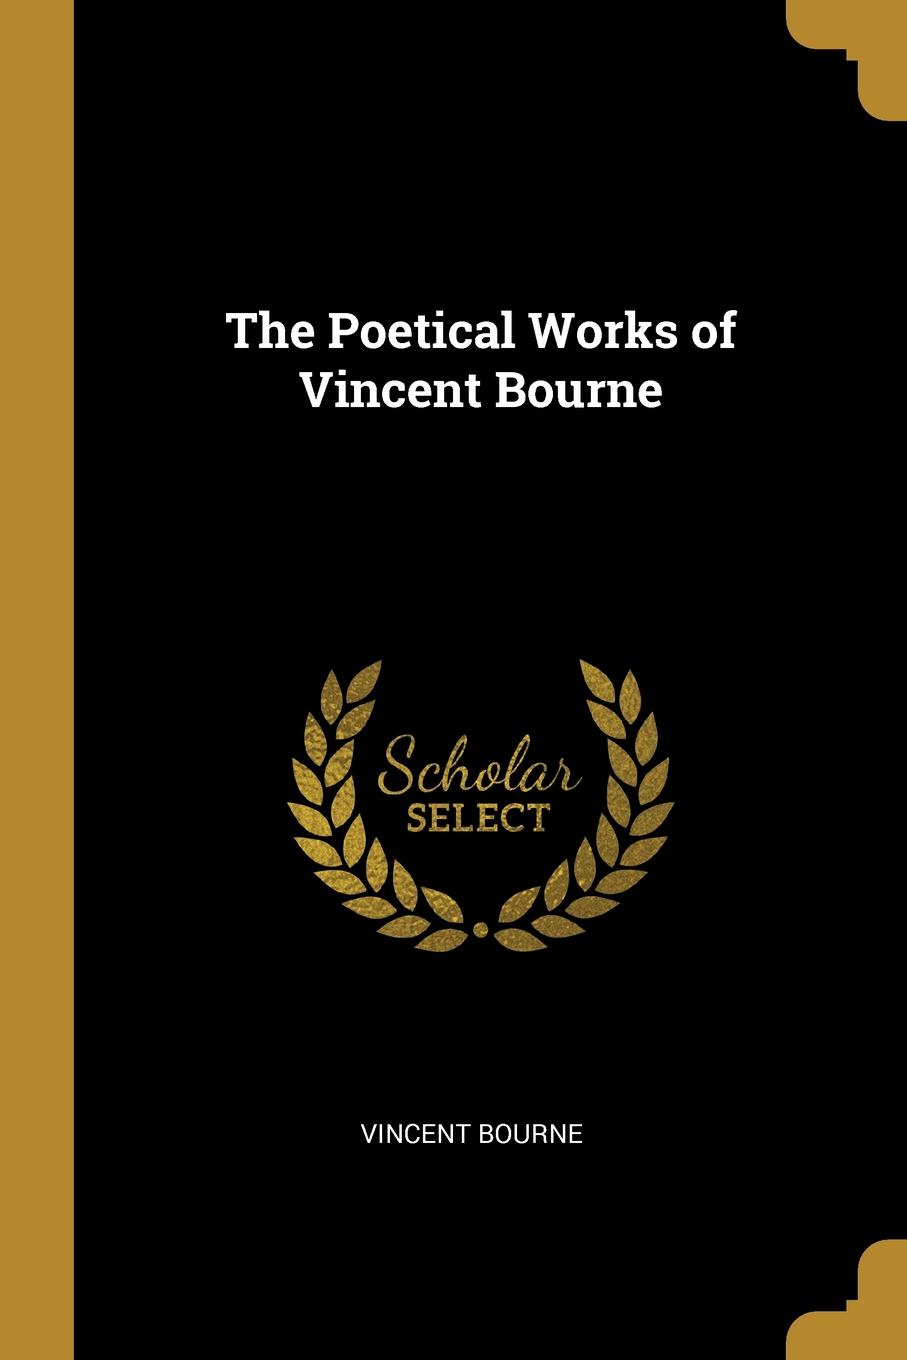 The Poetical Works of Vincent Bourne